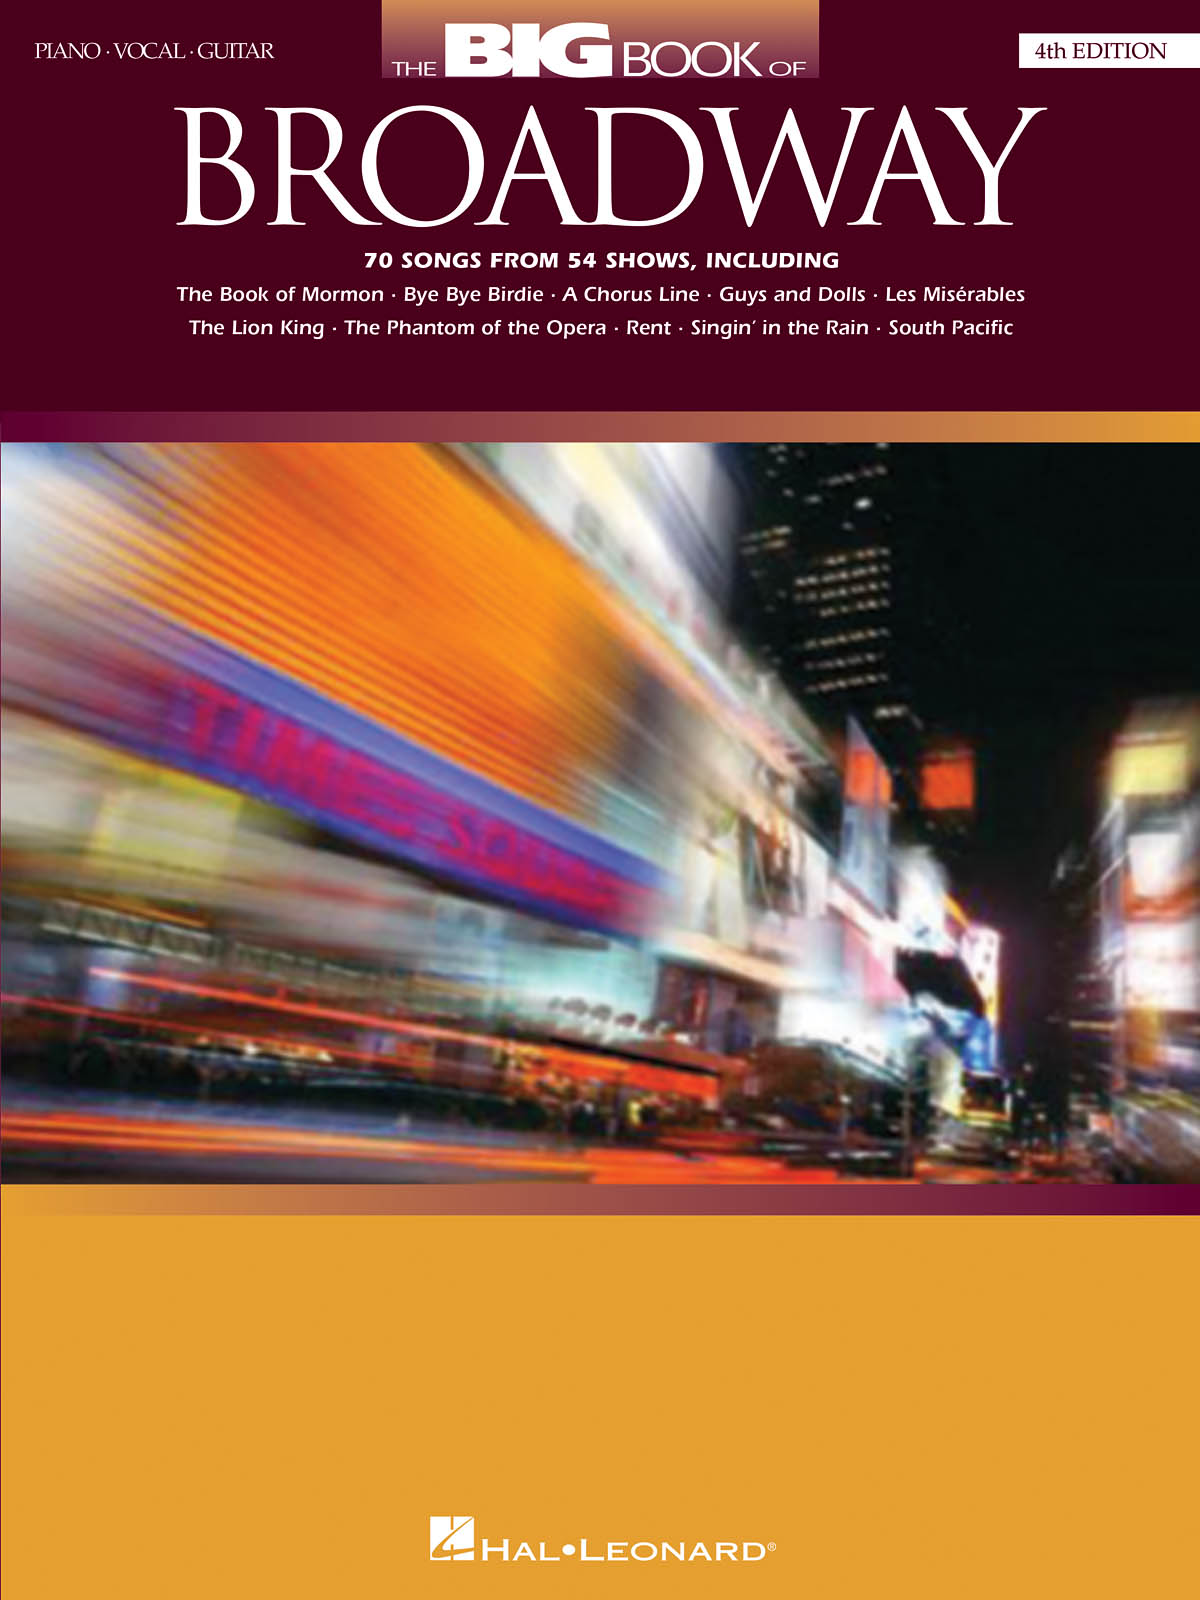 The Big Book of Broadway - 4th Edition: Piano  Vocal and Guitar: Mixed Songbook